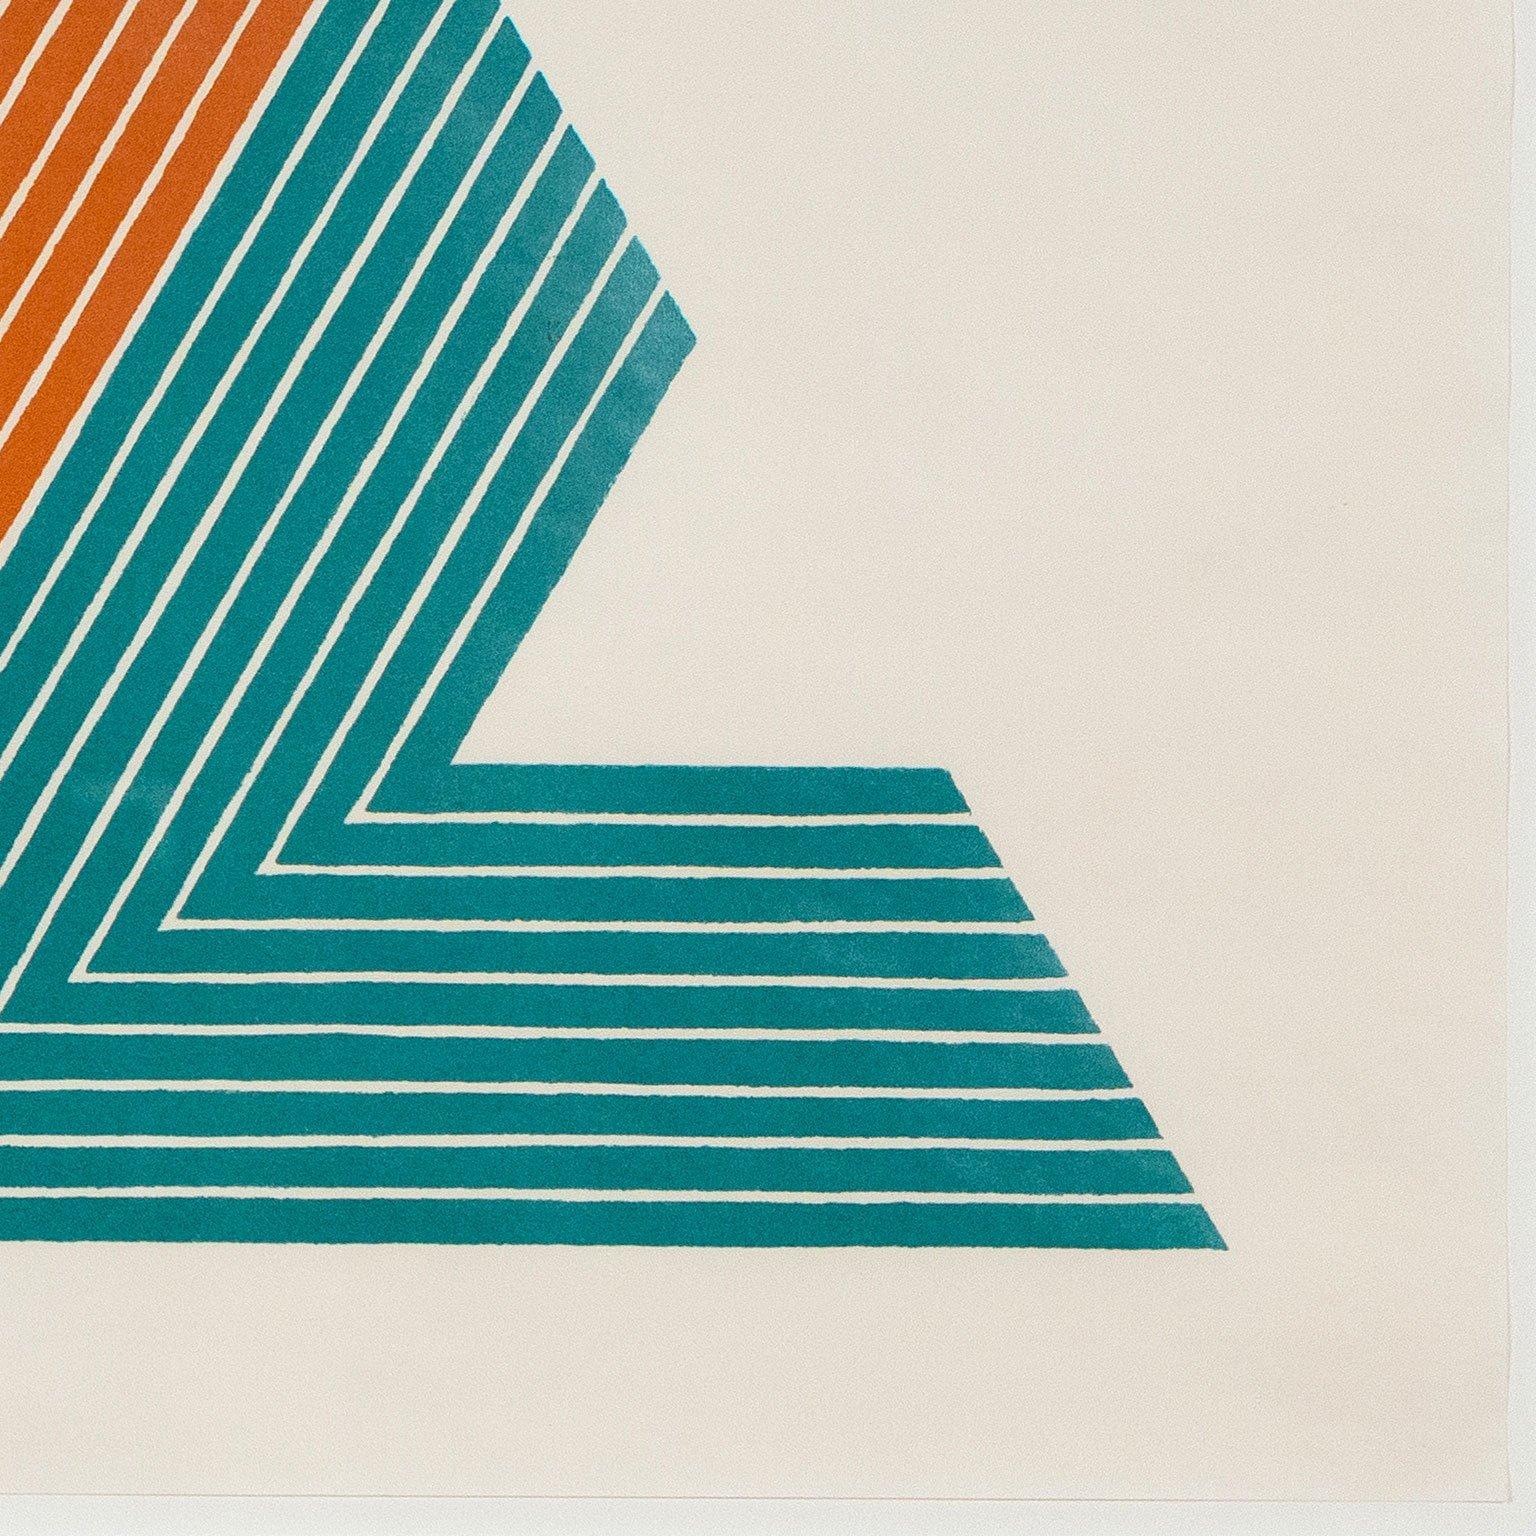 Empress of India II - Gray Abstract Print by Frank Stella